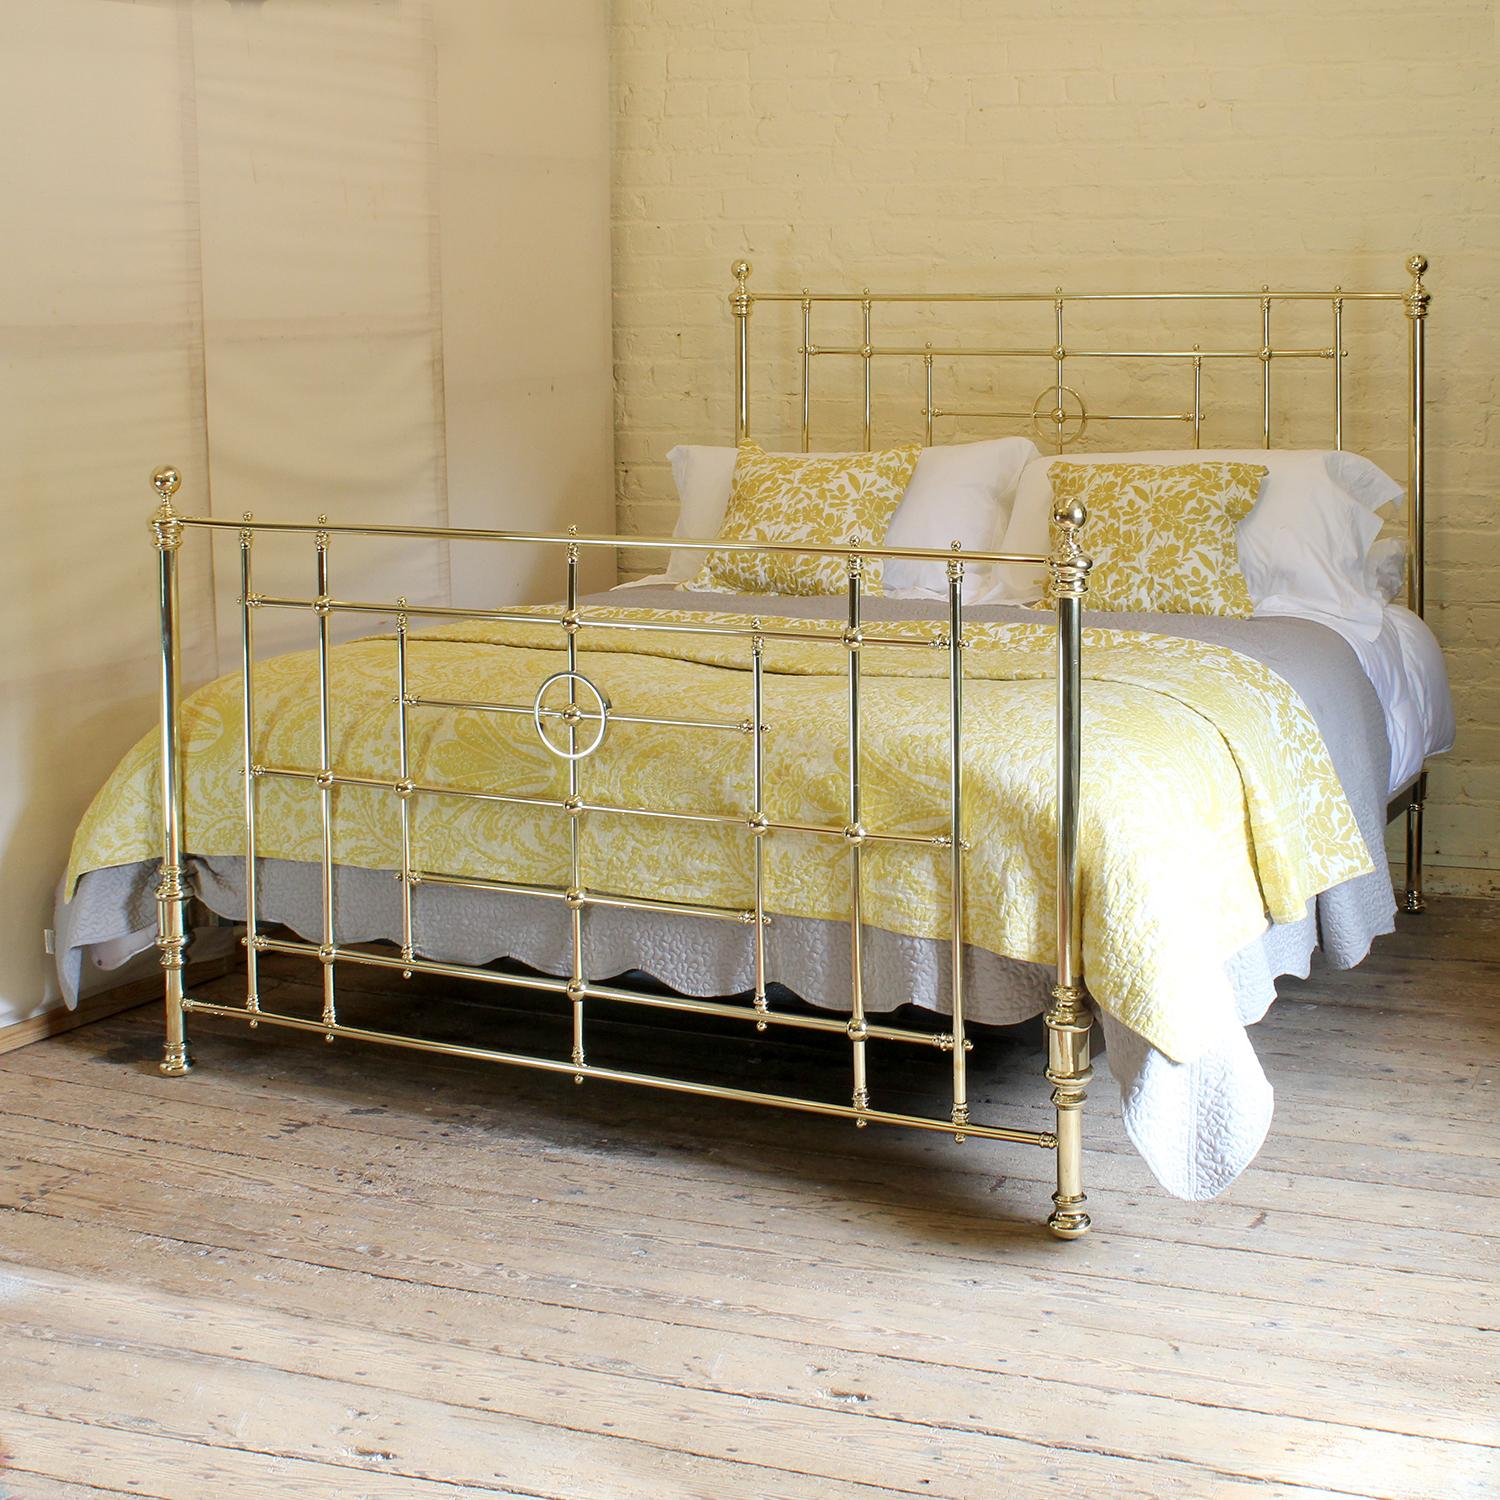 6ft wide Victorian antique brass bed with central ring decoration on the head and foot panels. This elegant design of a brass bed was quite rare being 6ft wide.

This bed accepts a Californian king size. or British super king size (72 inches, 6ft or